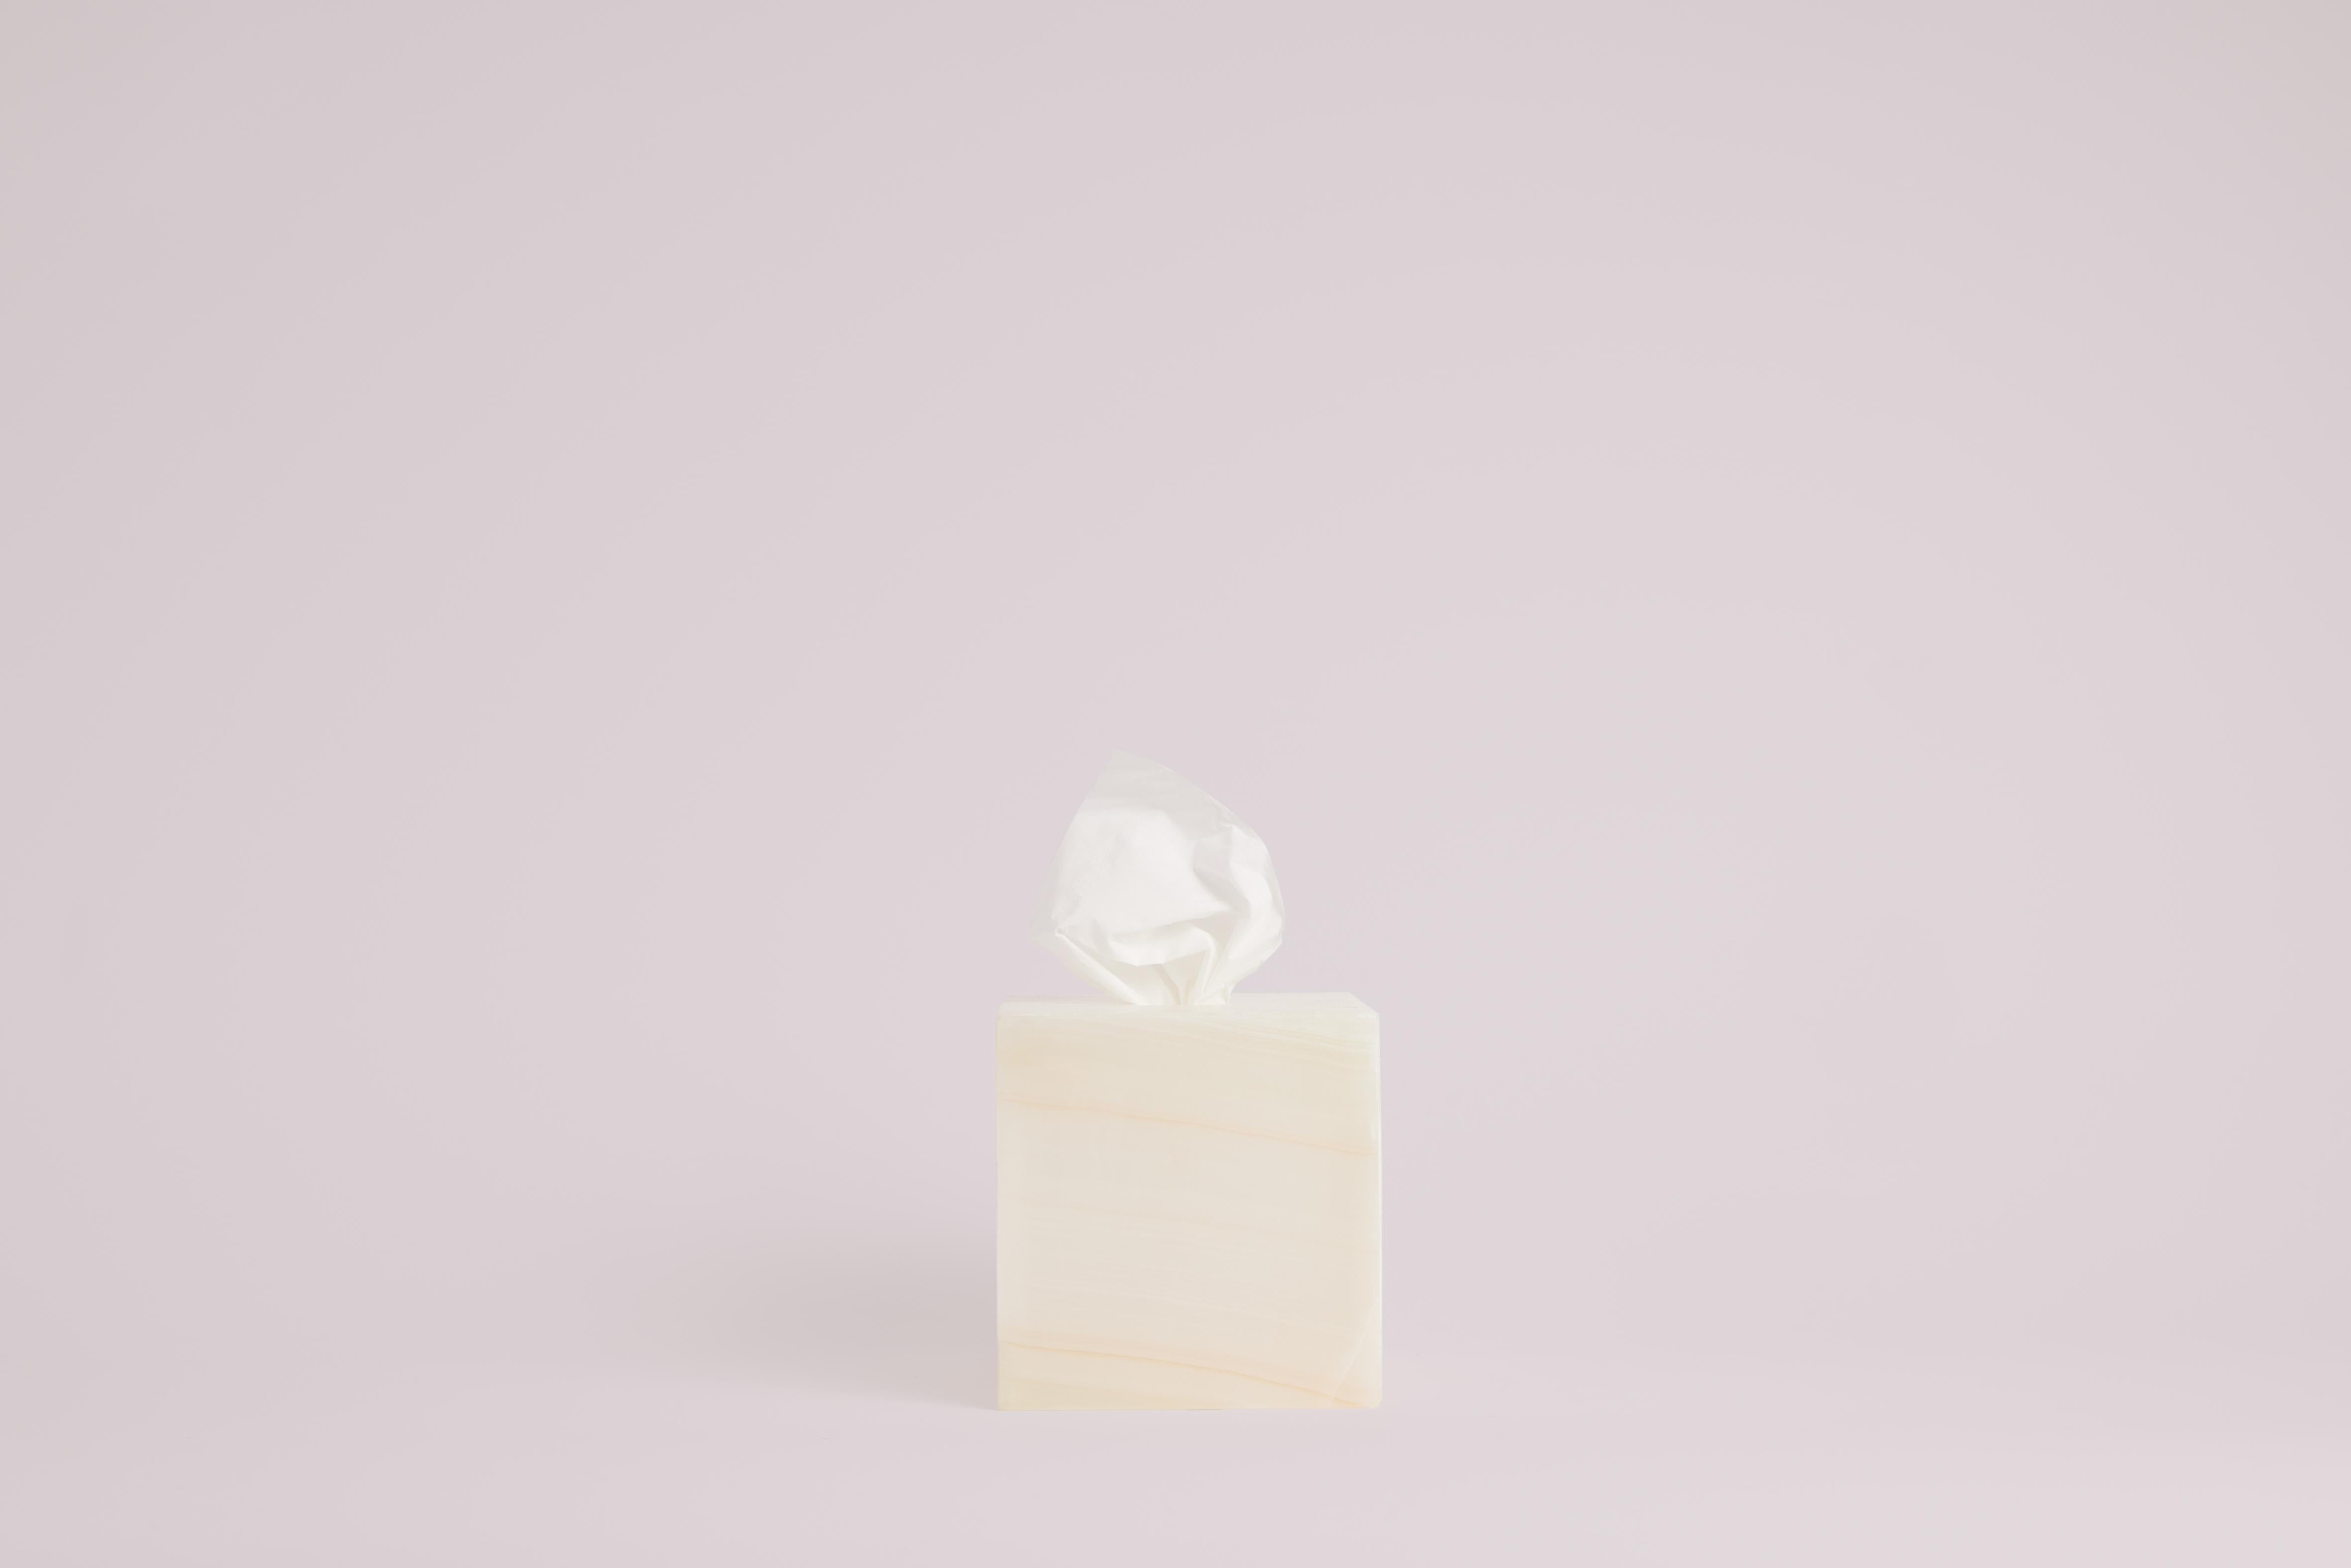 The Anne Tissue Box in White Onyx, designed by Studio Gaïa, is a stylish and functional accessory designed to add a touch of sophistication to any space. Made from high-quality red onyx, this tissue box combines the natural beauty of the stone with